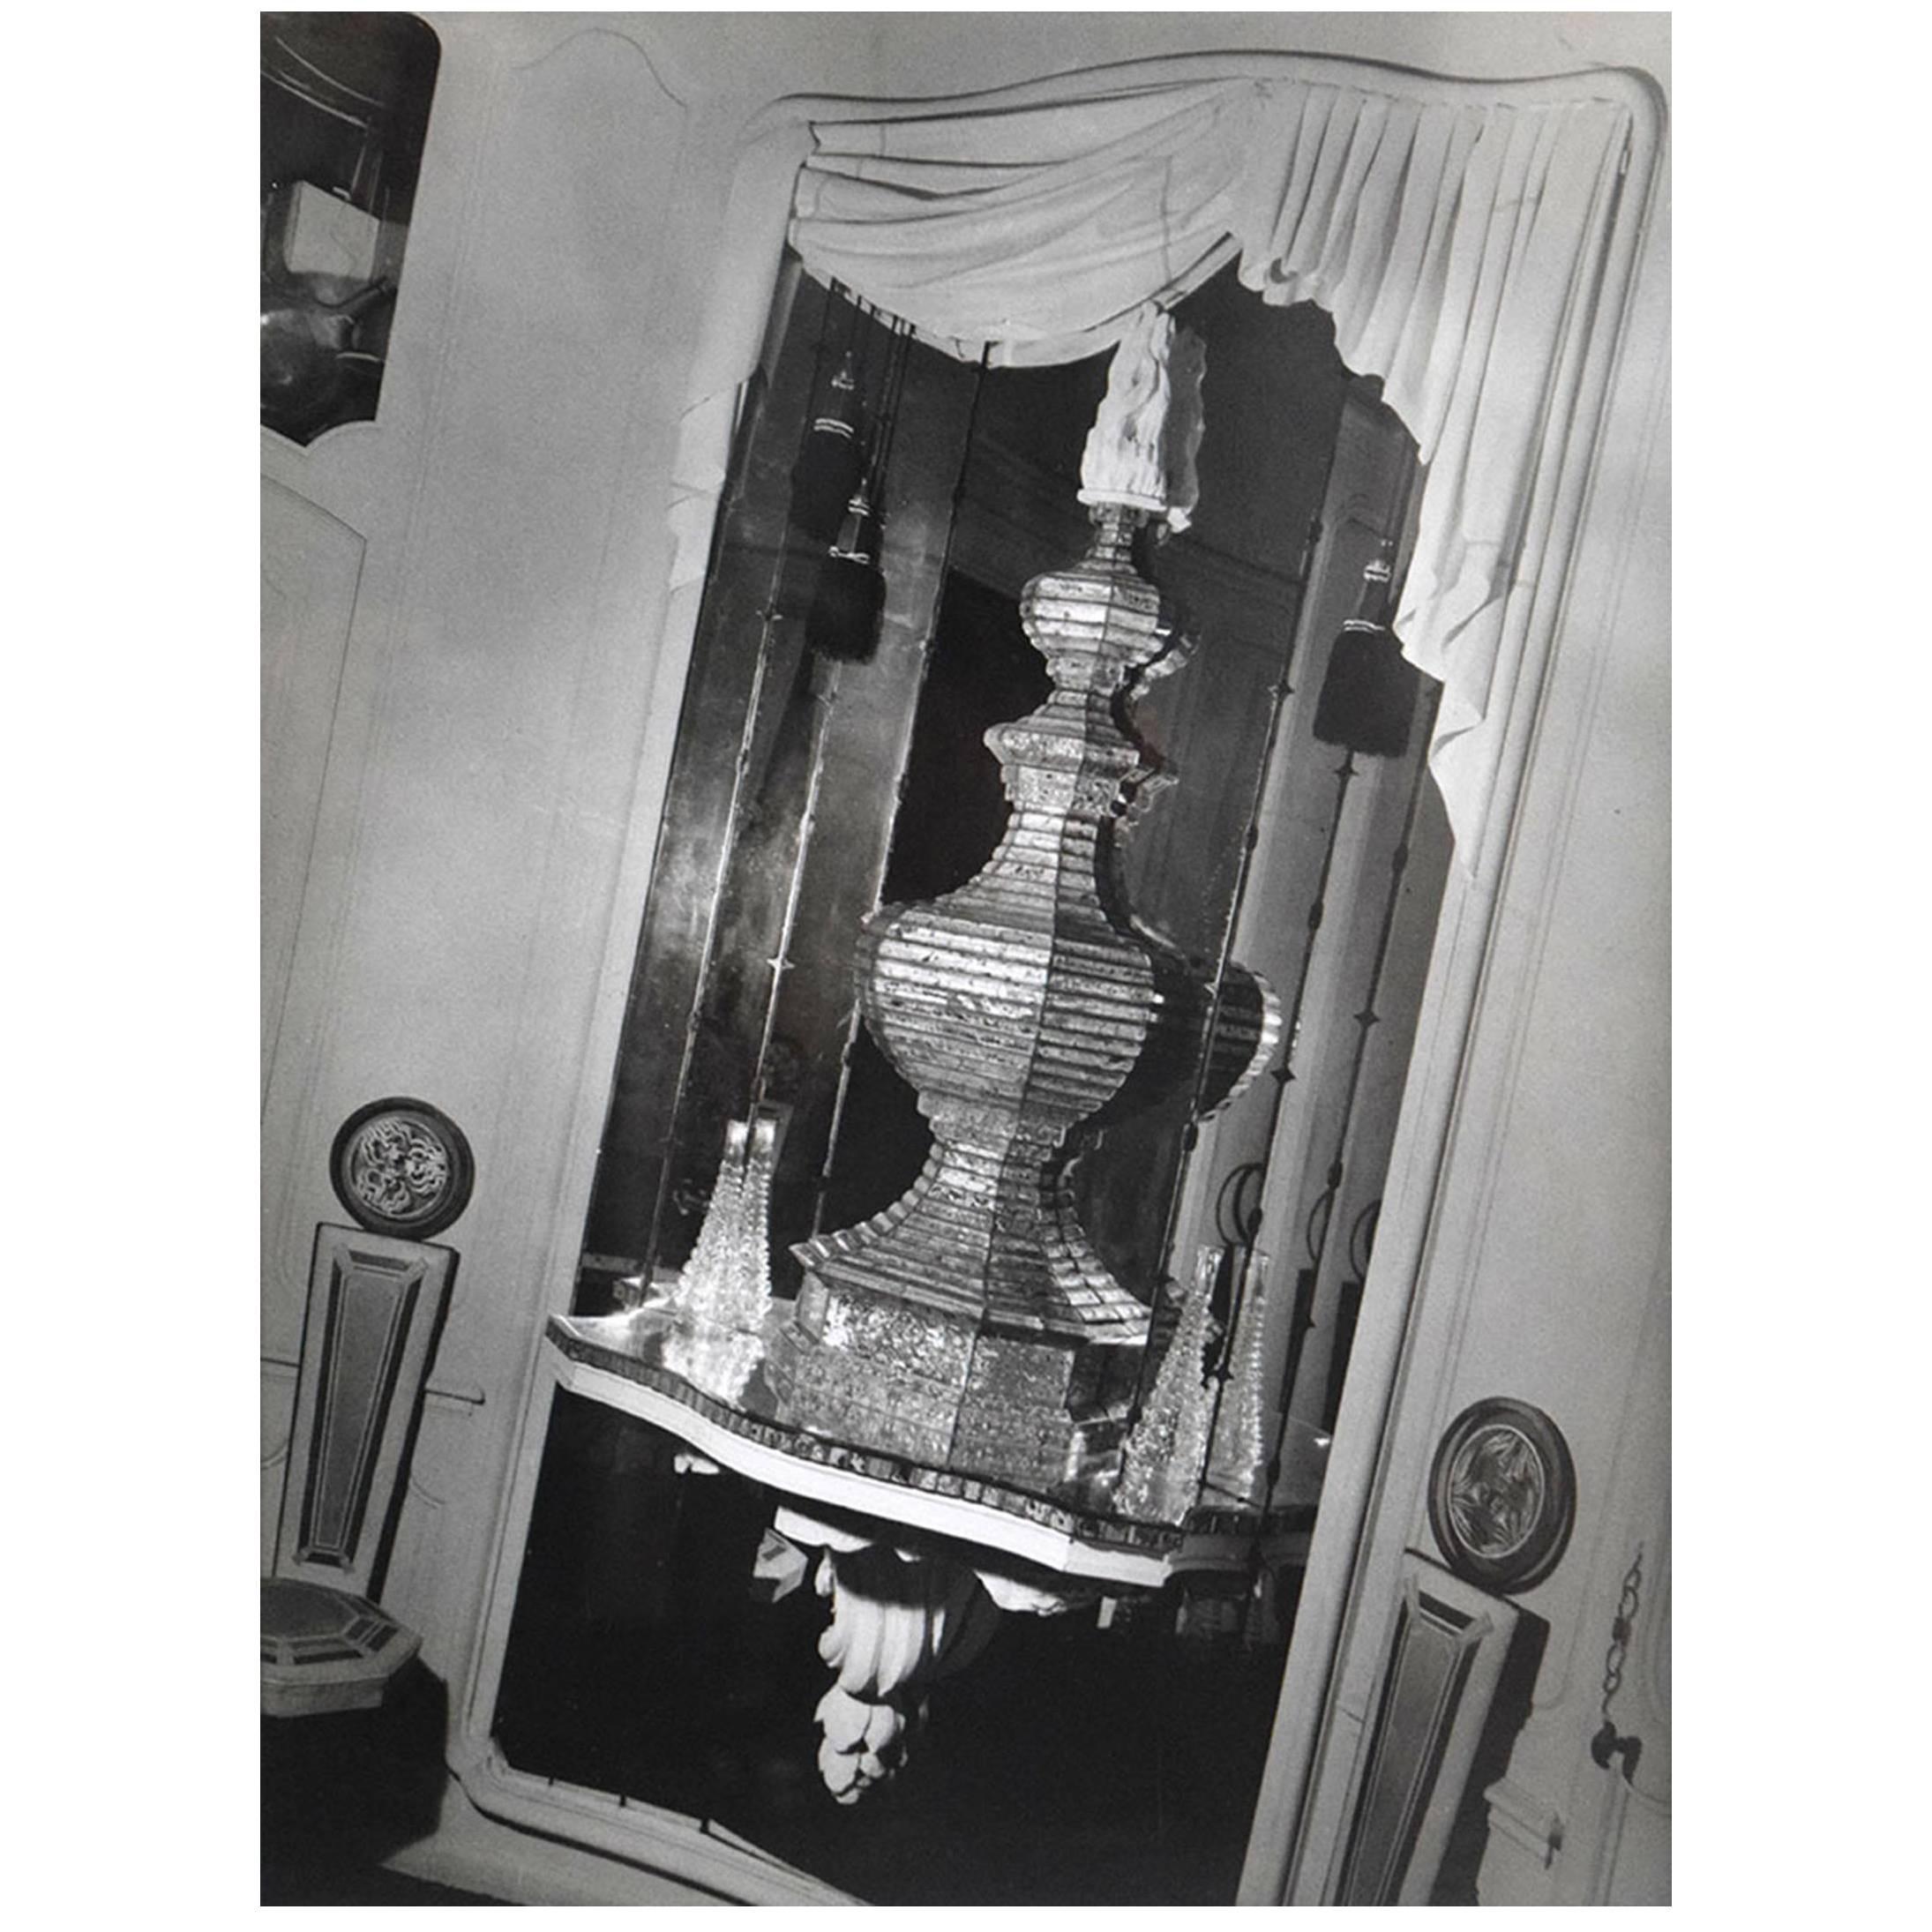 In the 1930s, furniture designer, decorator, and antiques dealer Serge Roche decorated his own Paris townhouse in the Neo-Baroque style for which he was celebrated. When the Hungarian-born Francois Kollar photographed it in 1938, he focused on